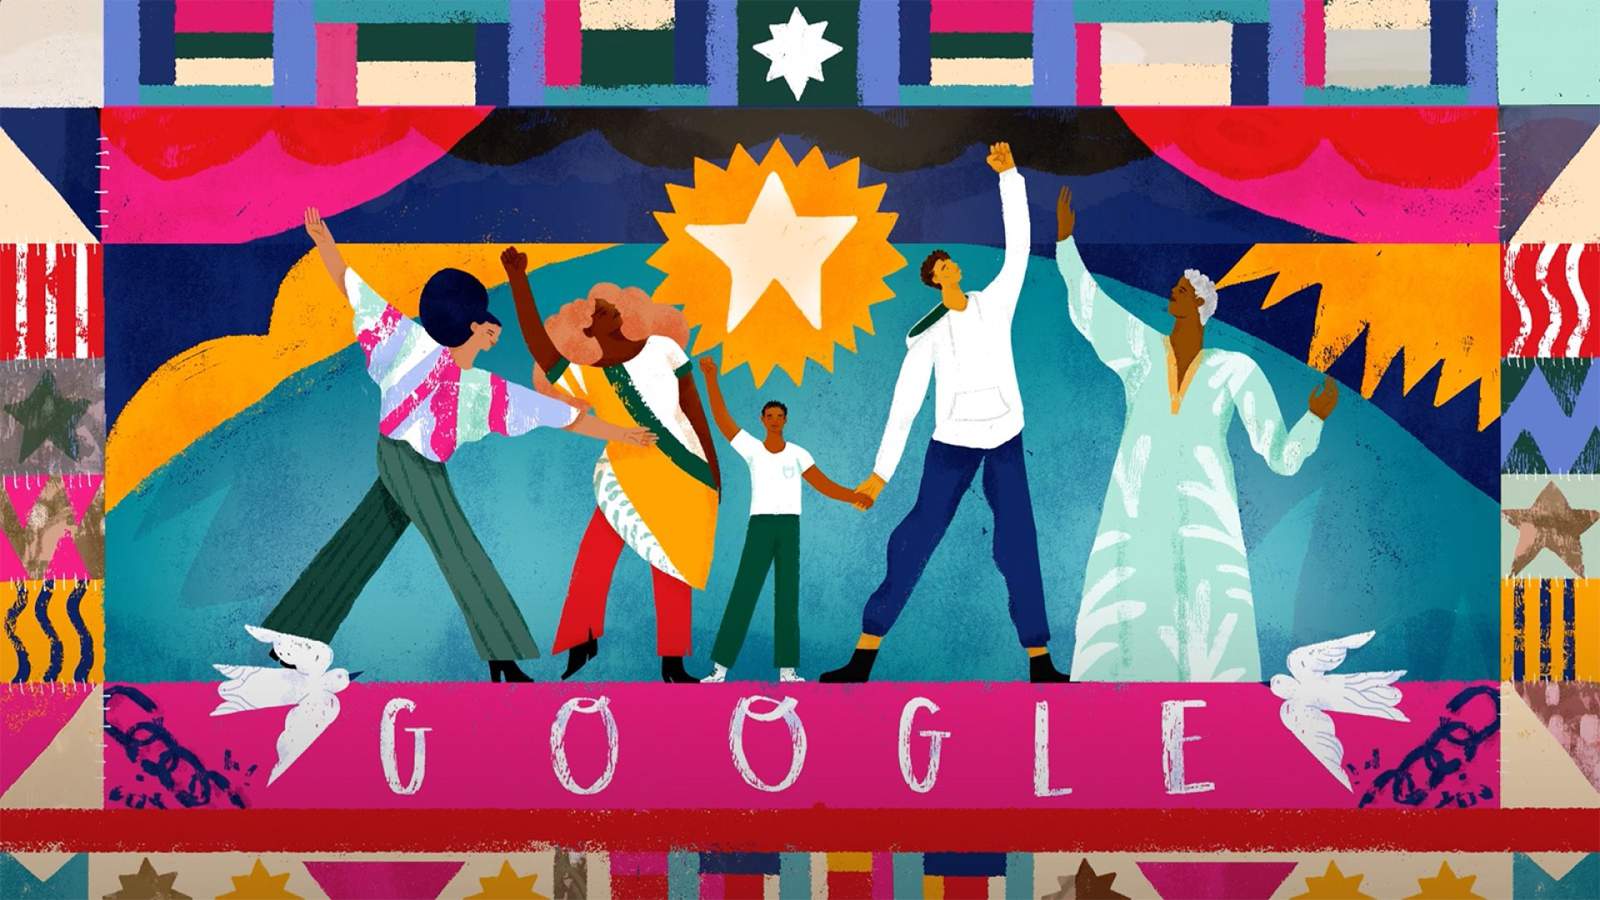 Google Doodle commemorates the 155th anniversary of Juneteenth, set to ‘Lift Every Voice and Sing’